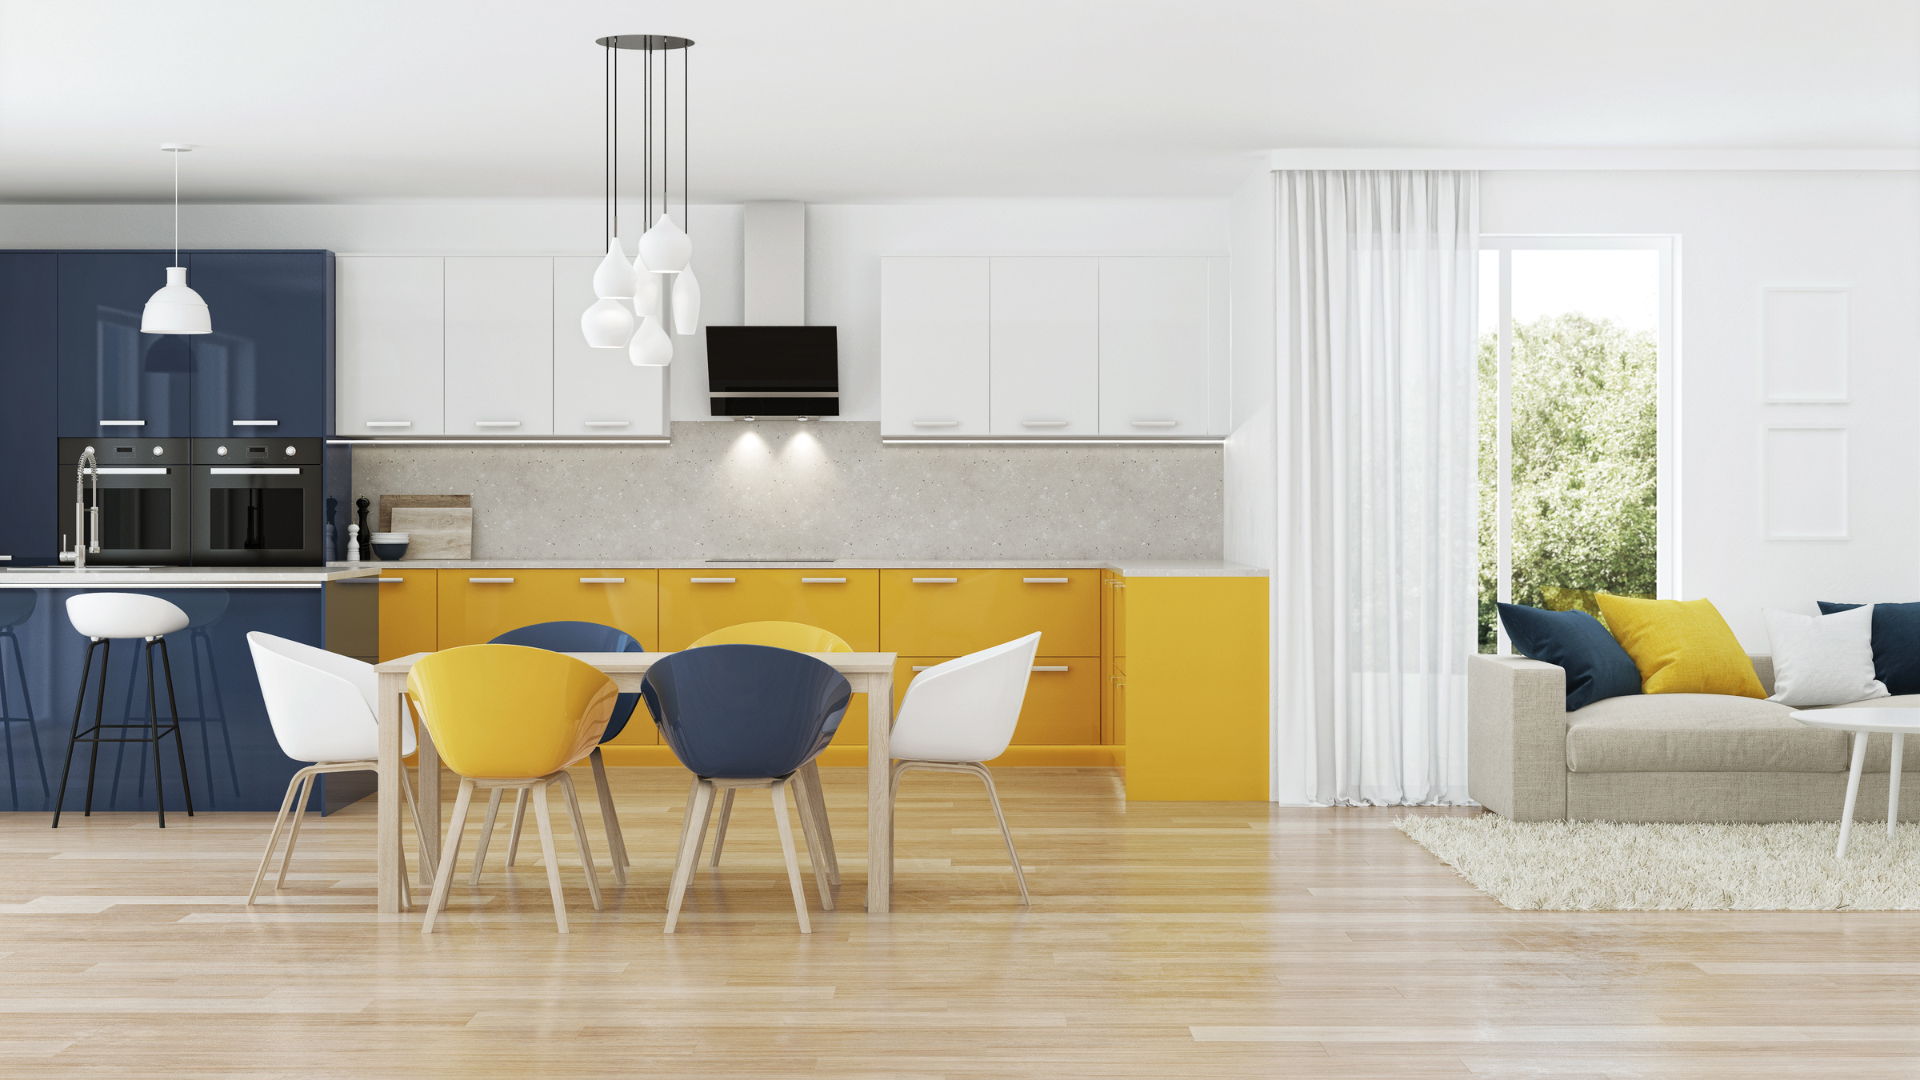 Interior design of a bold, contrasting yellow and blue kitchen